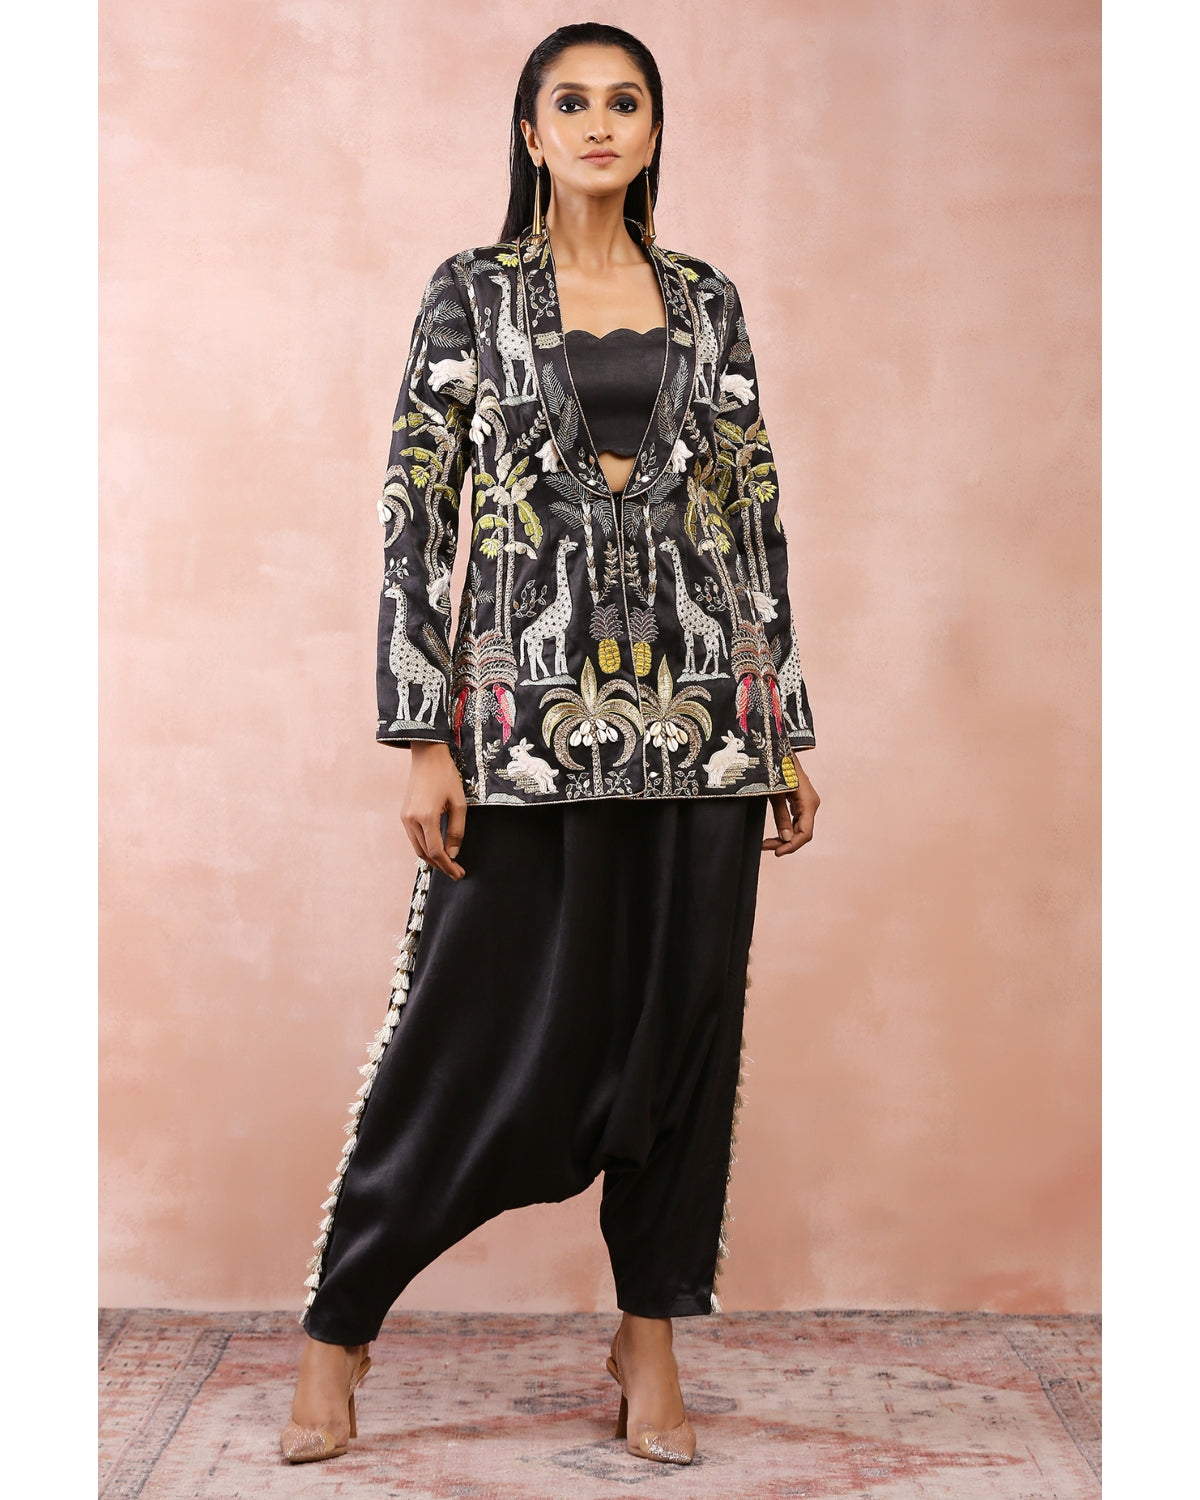 Black Embroidered Jacket With Bustier And Low Crotch Pant